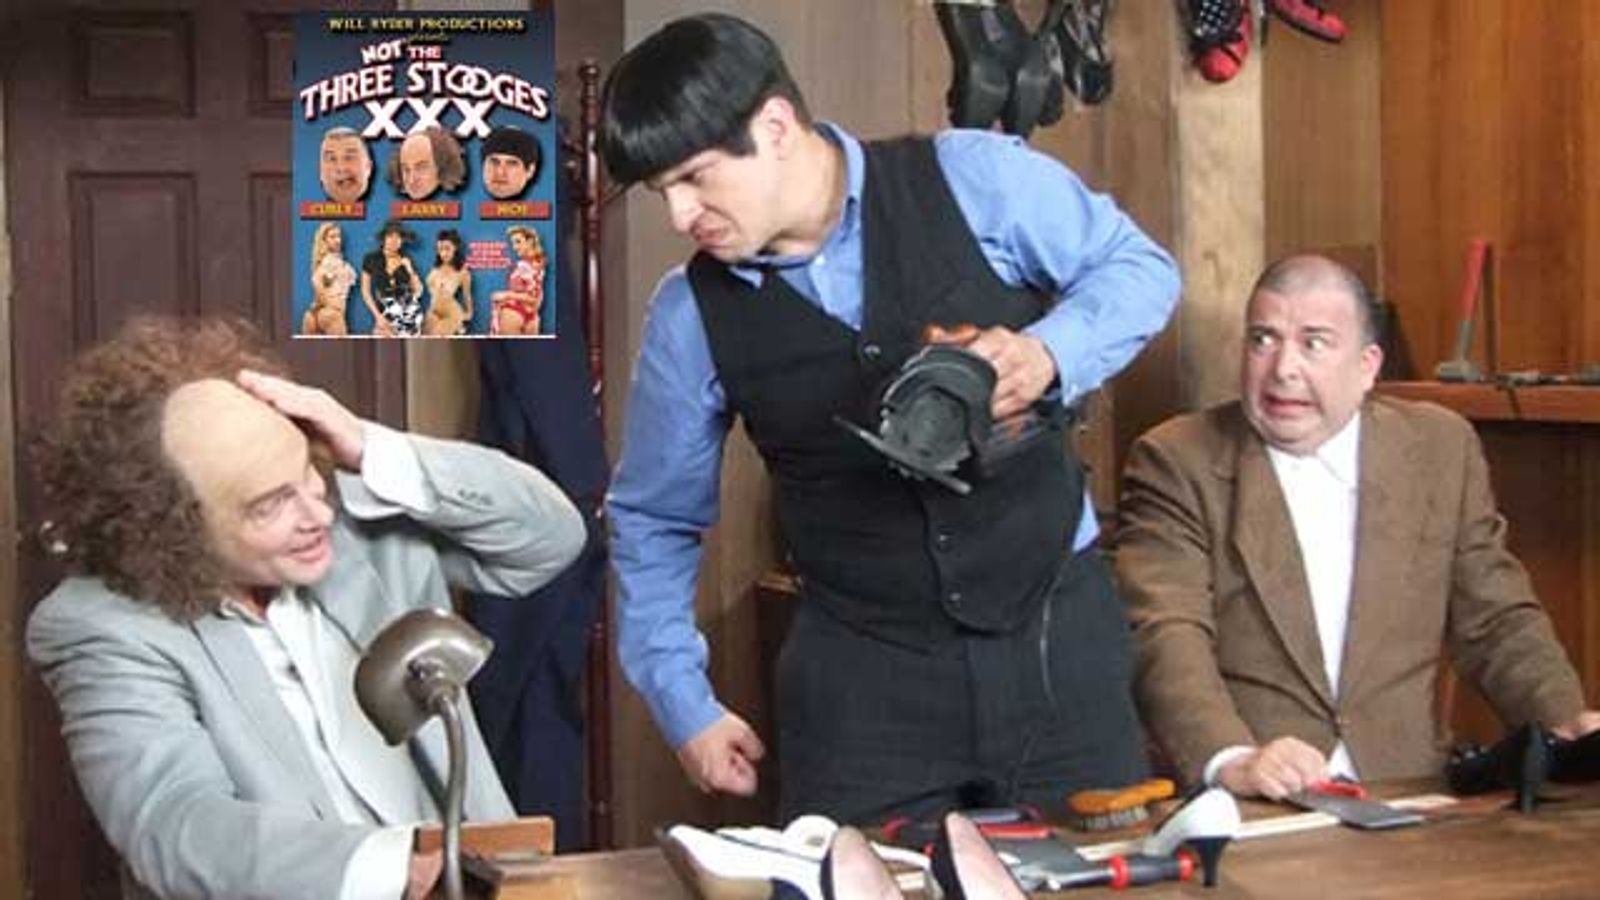 'Not the Three Stooges XXX' Debuts at #5 on DVD Sales Chart